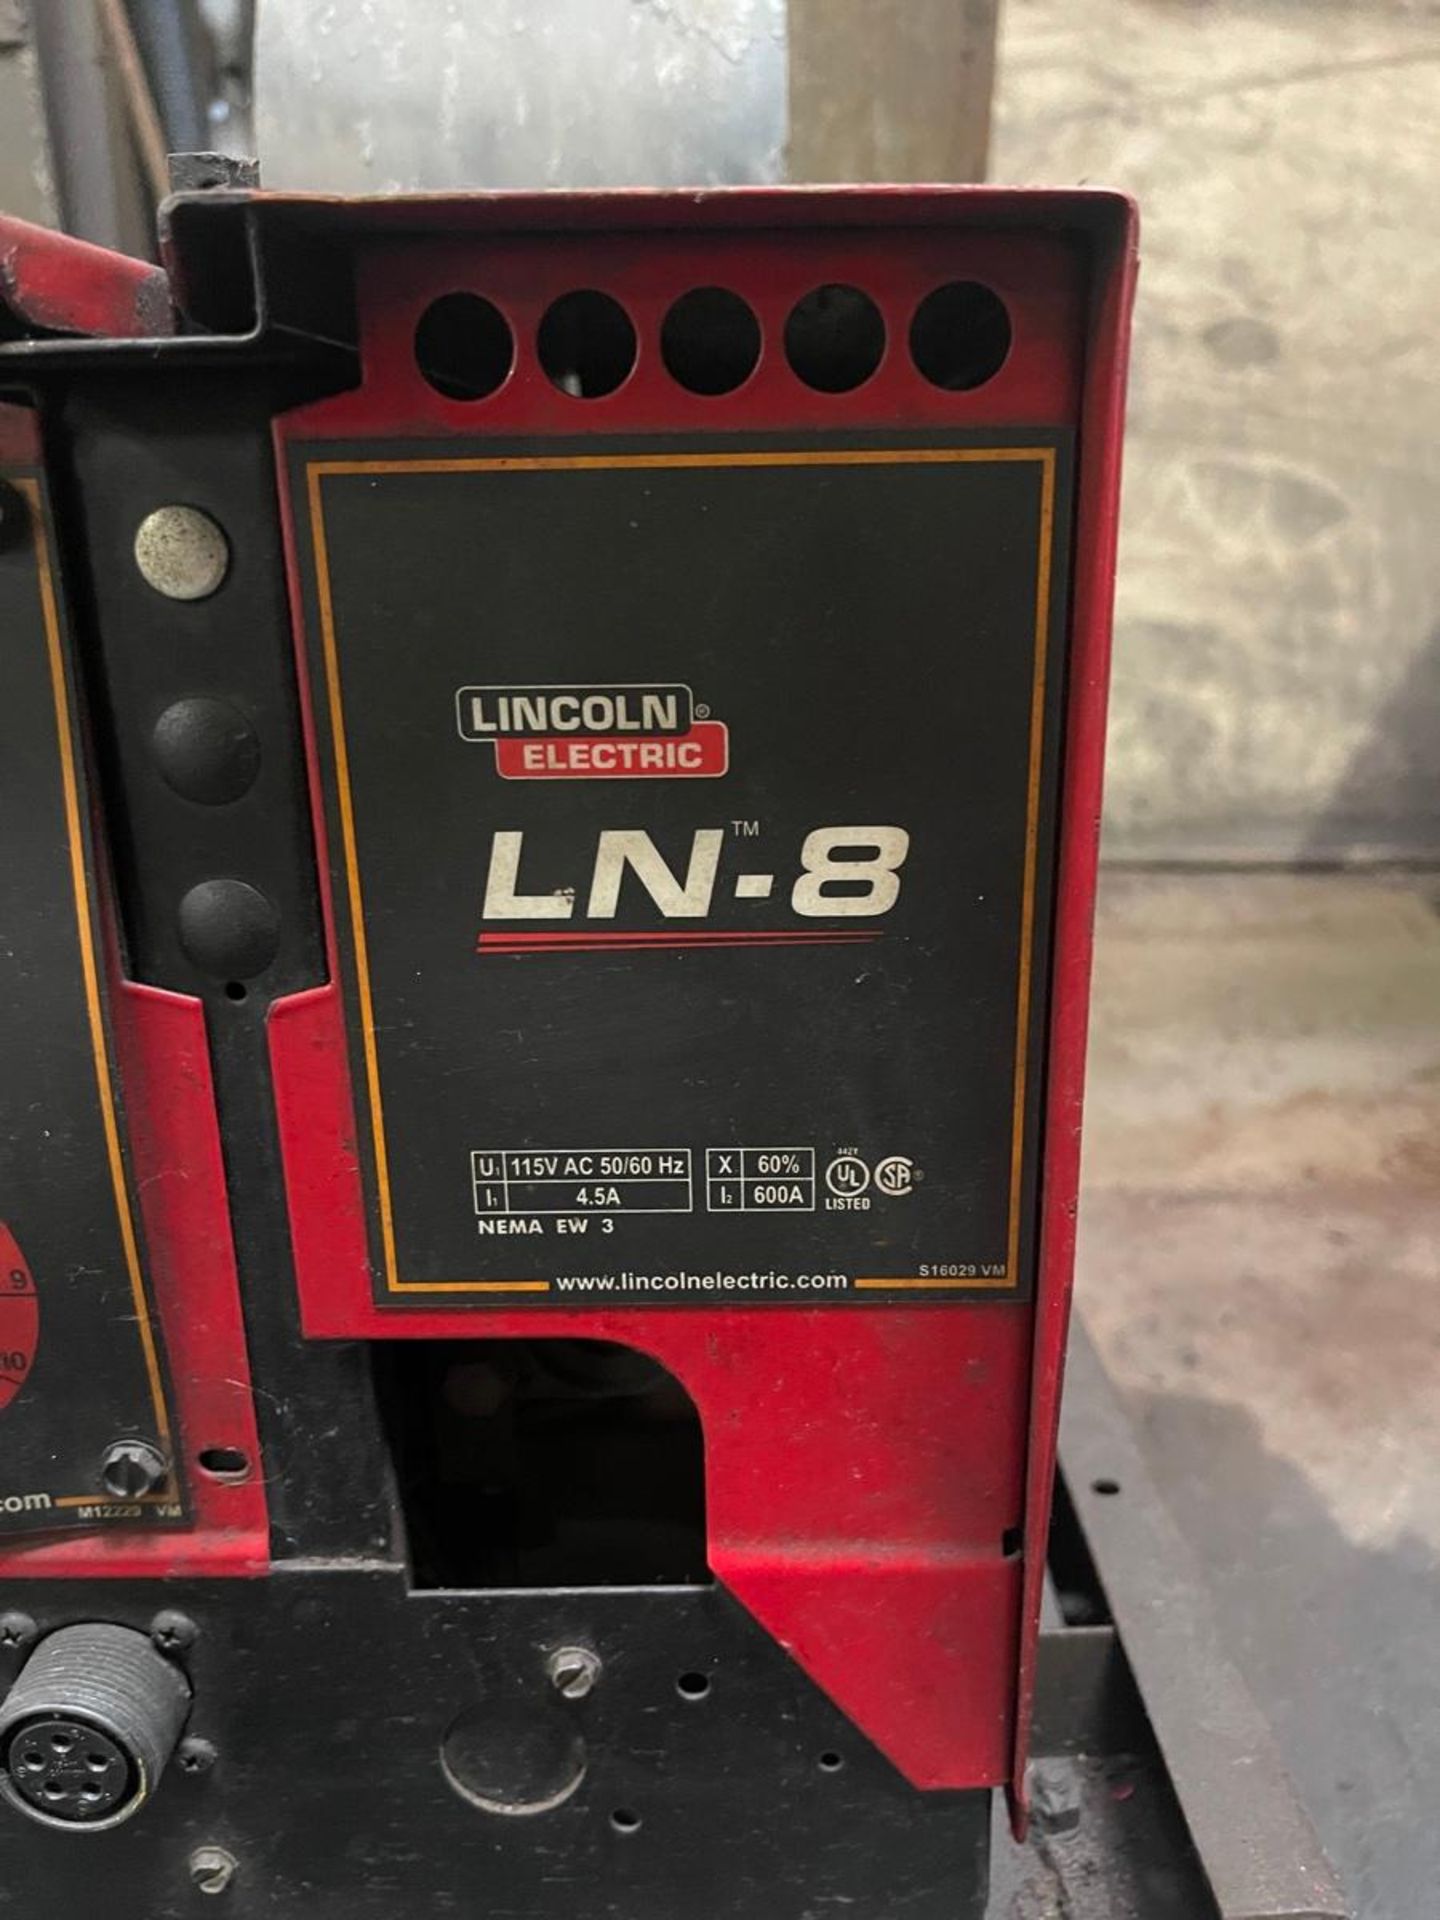 Lincoln Electric IDEALARC DC600 Multiprocess Welder - Image 3 of 3